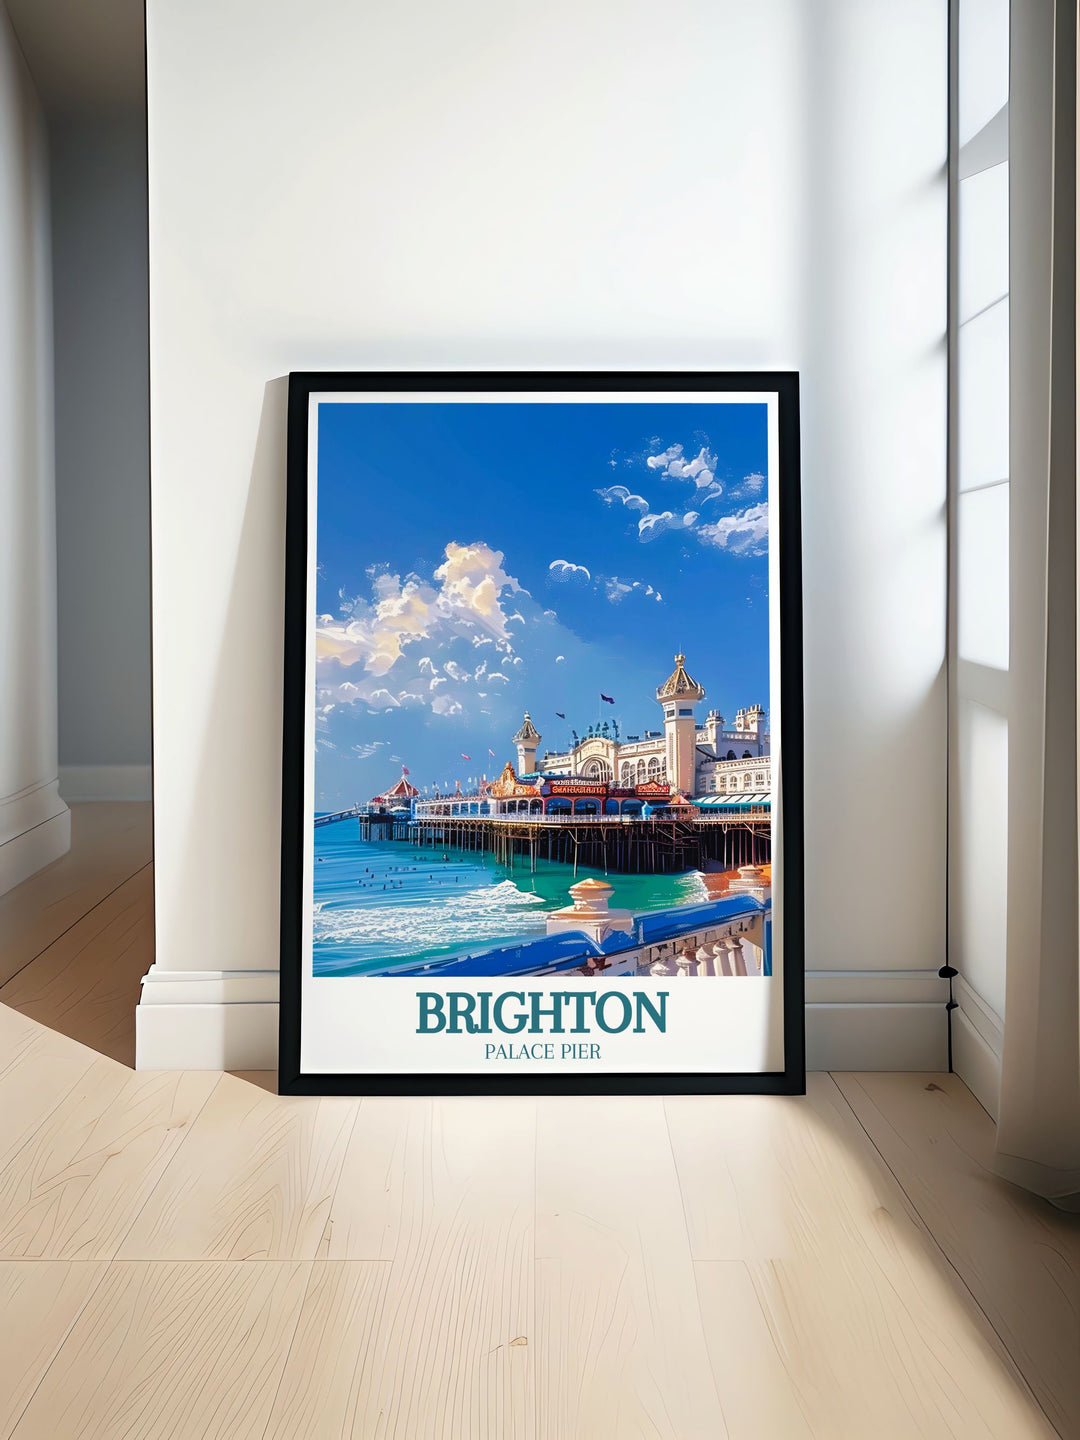 Brighton Pier Poster featuring the iconic Brighton Palace Pier with the serene English Channel a perfect blend of Art Deco style and vintage travel charm ideal for enhancing home decor or as a unique gift for art lovers.